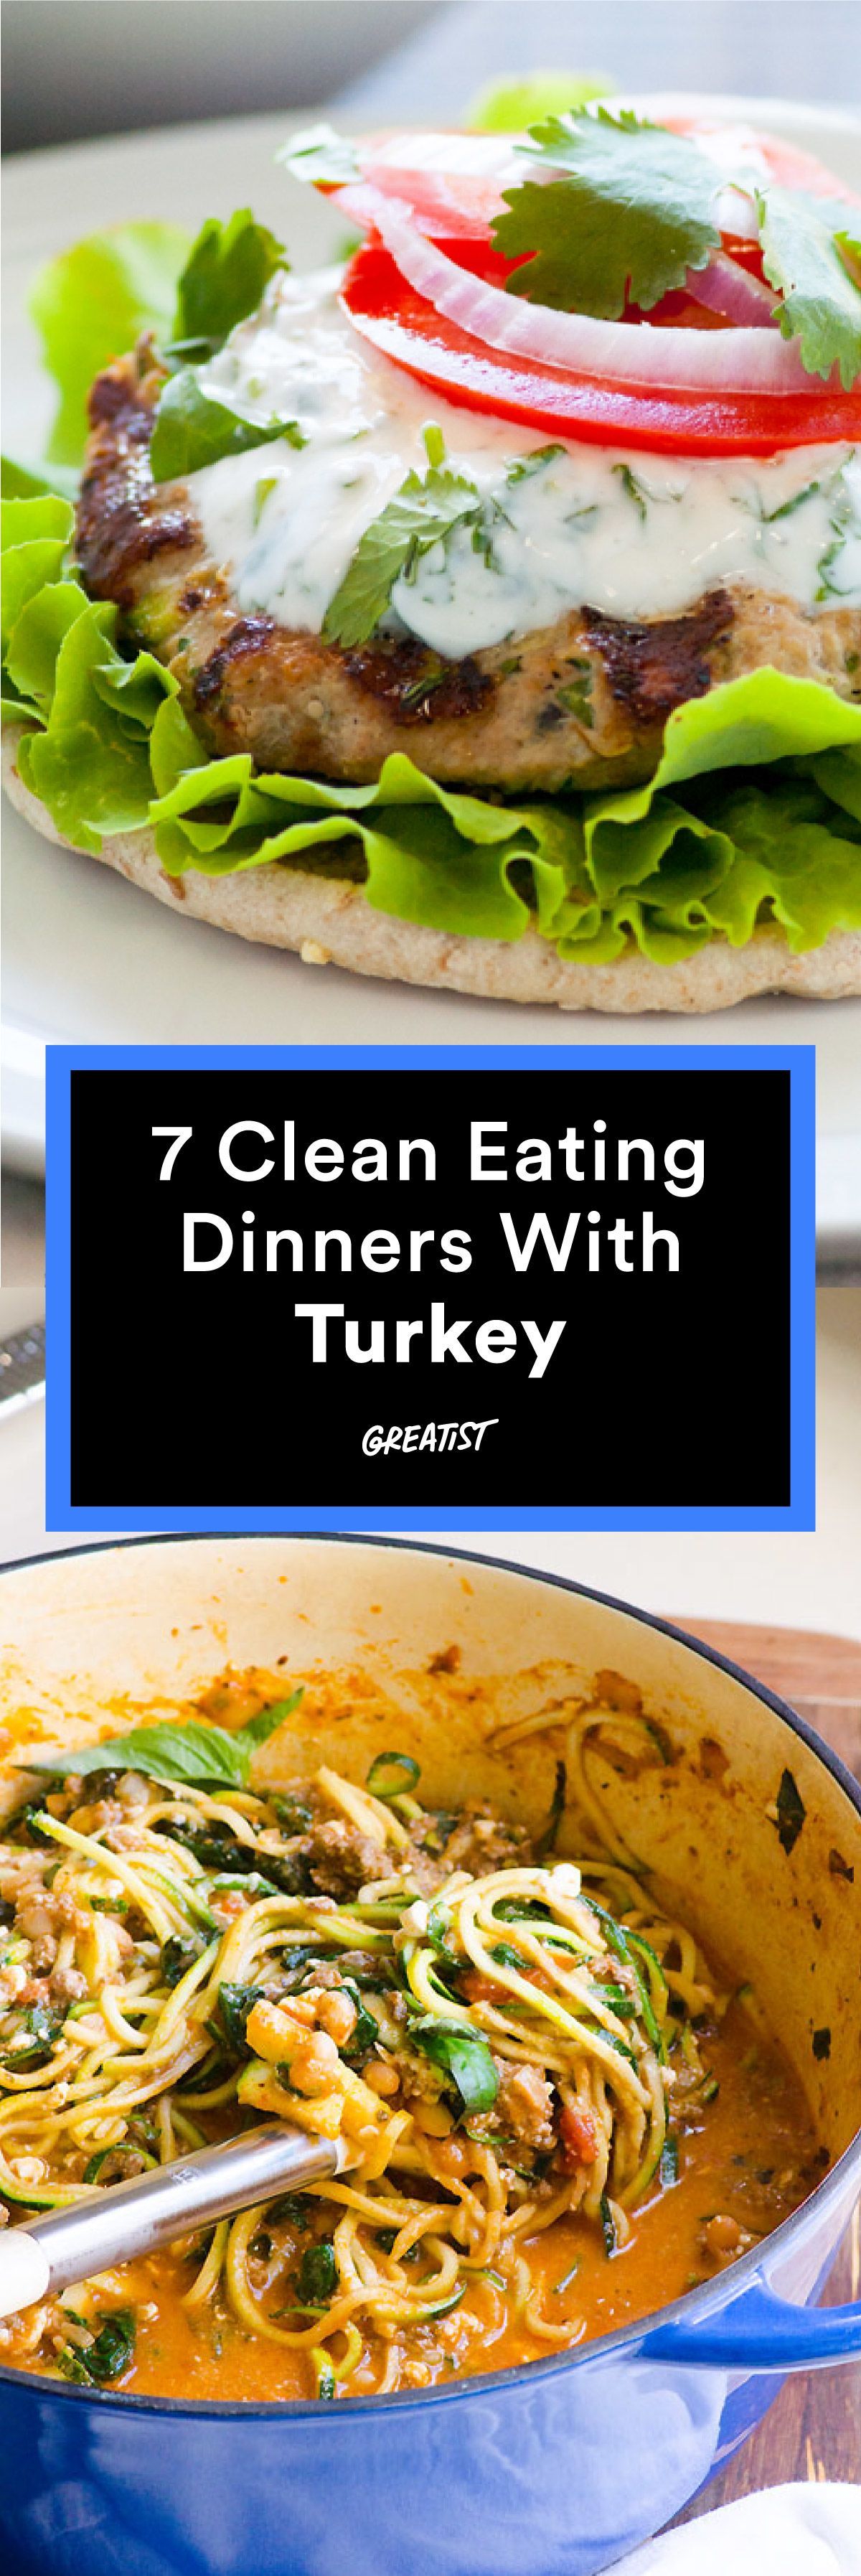 7 Surprisingly Easy Clean Eating Dinners -   23 fitness pictures clean eating
 ideas